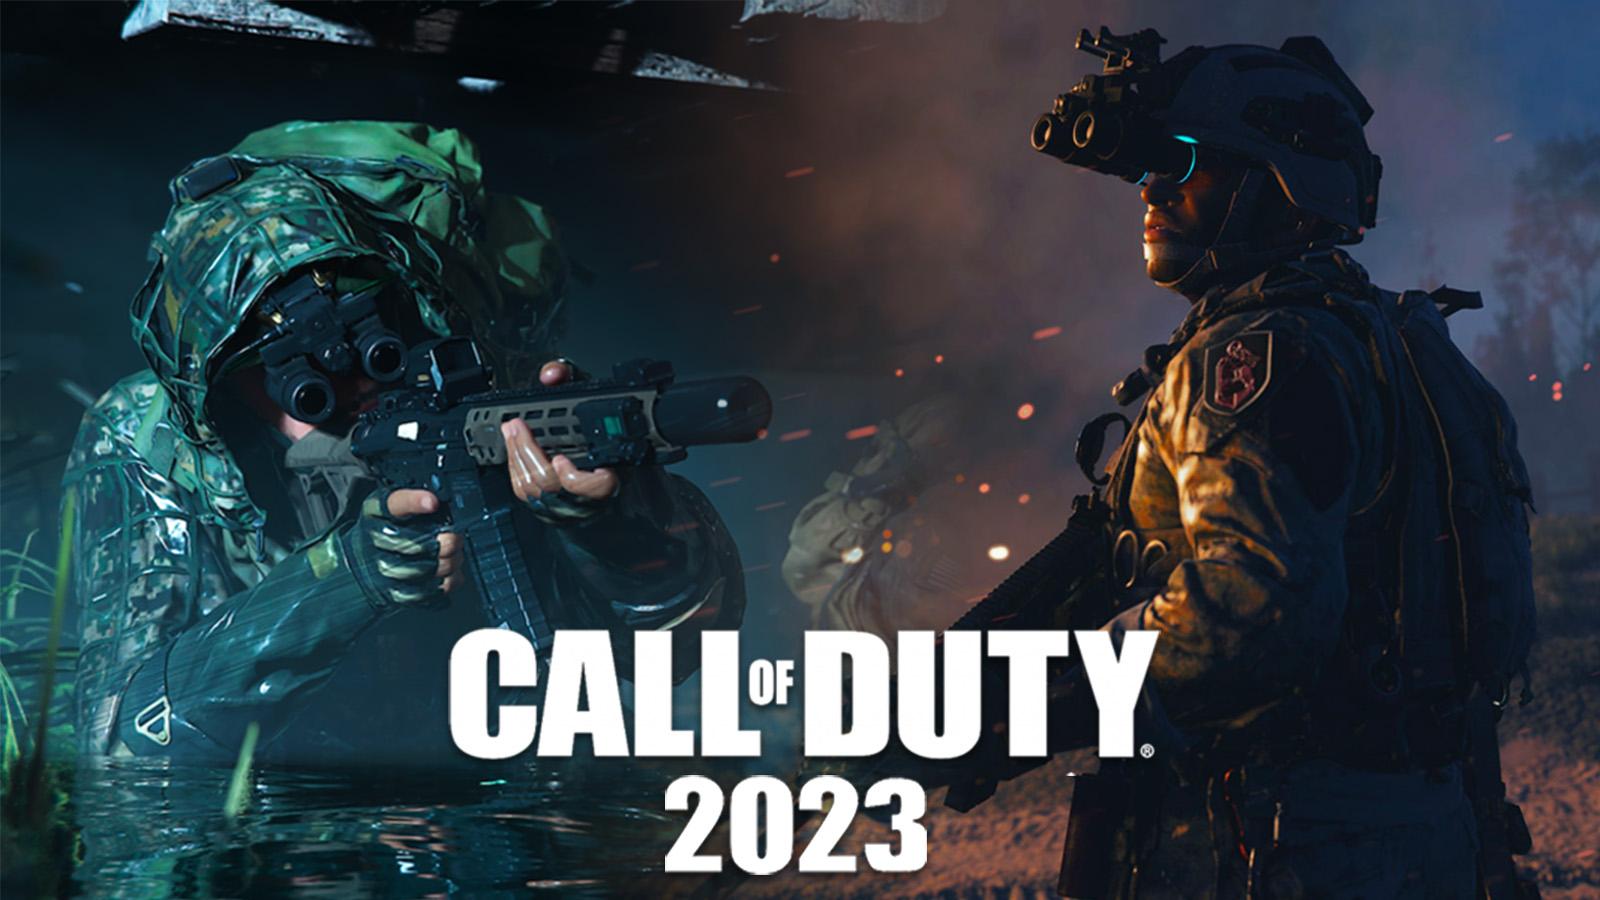 Call of Duty images with 2023 logo